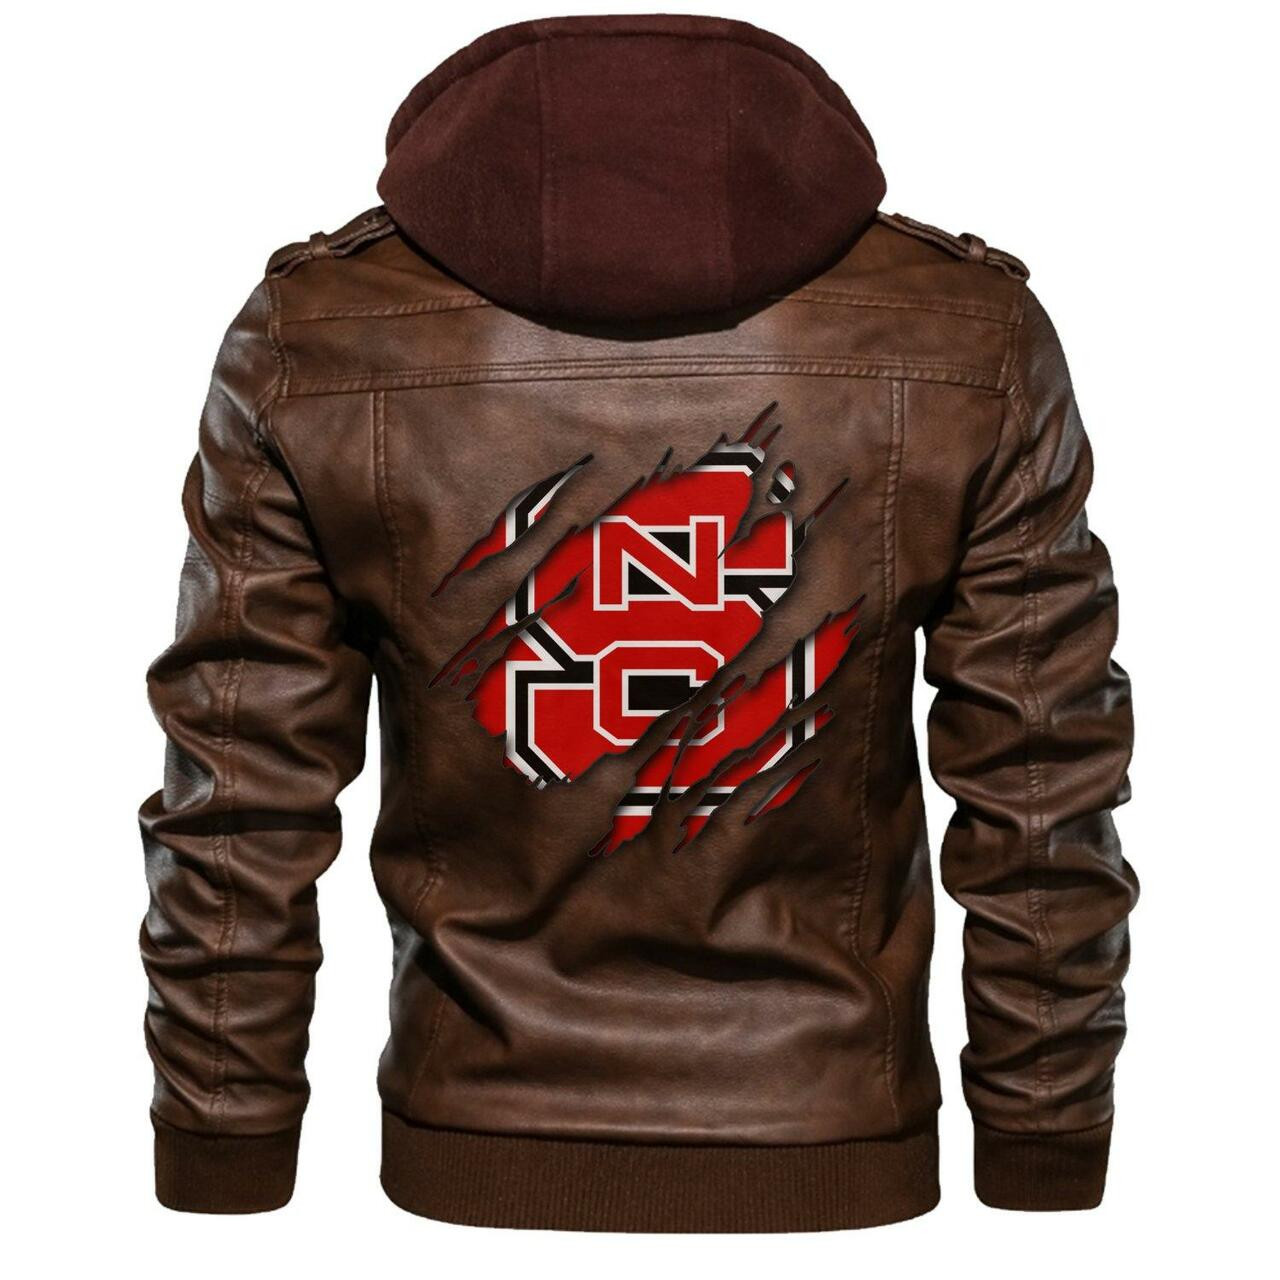 You can find Leather Jacket online at a great price 34